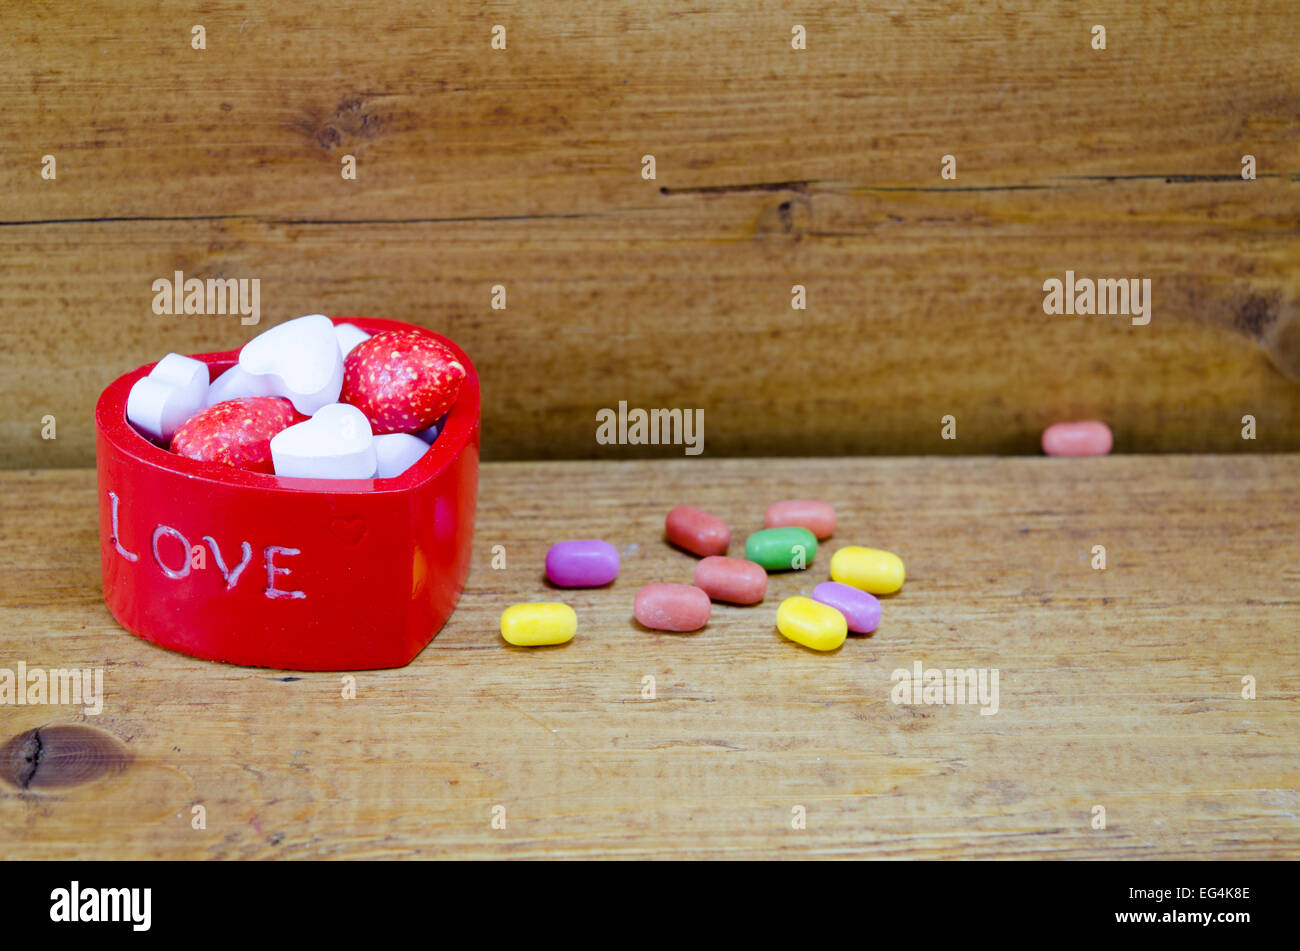 Hear shaped box filled with colorful candies Stock Photo